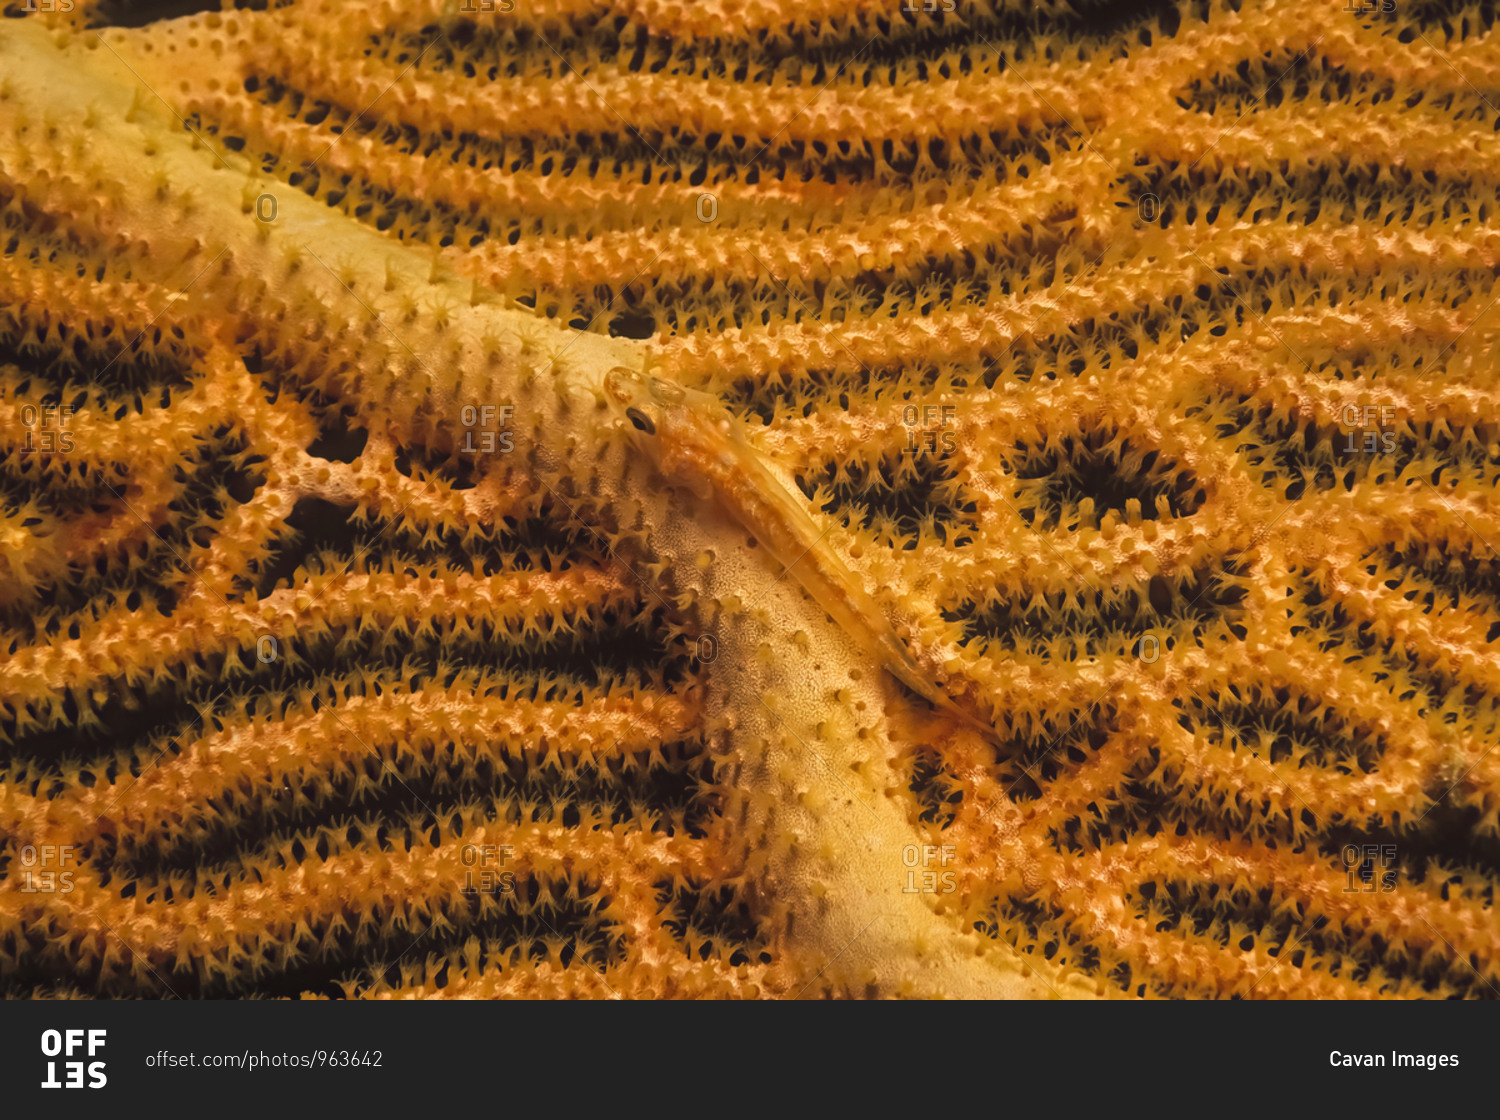 A small orange fish camouflaged on a fan coral in Madagascar.